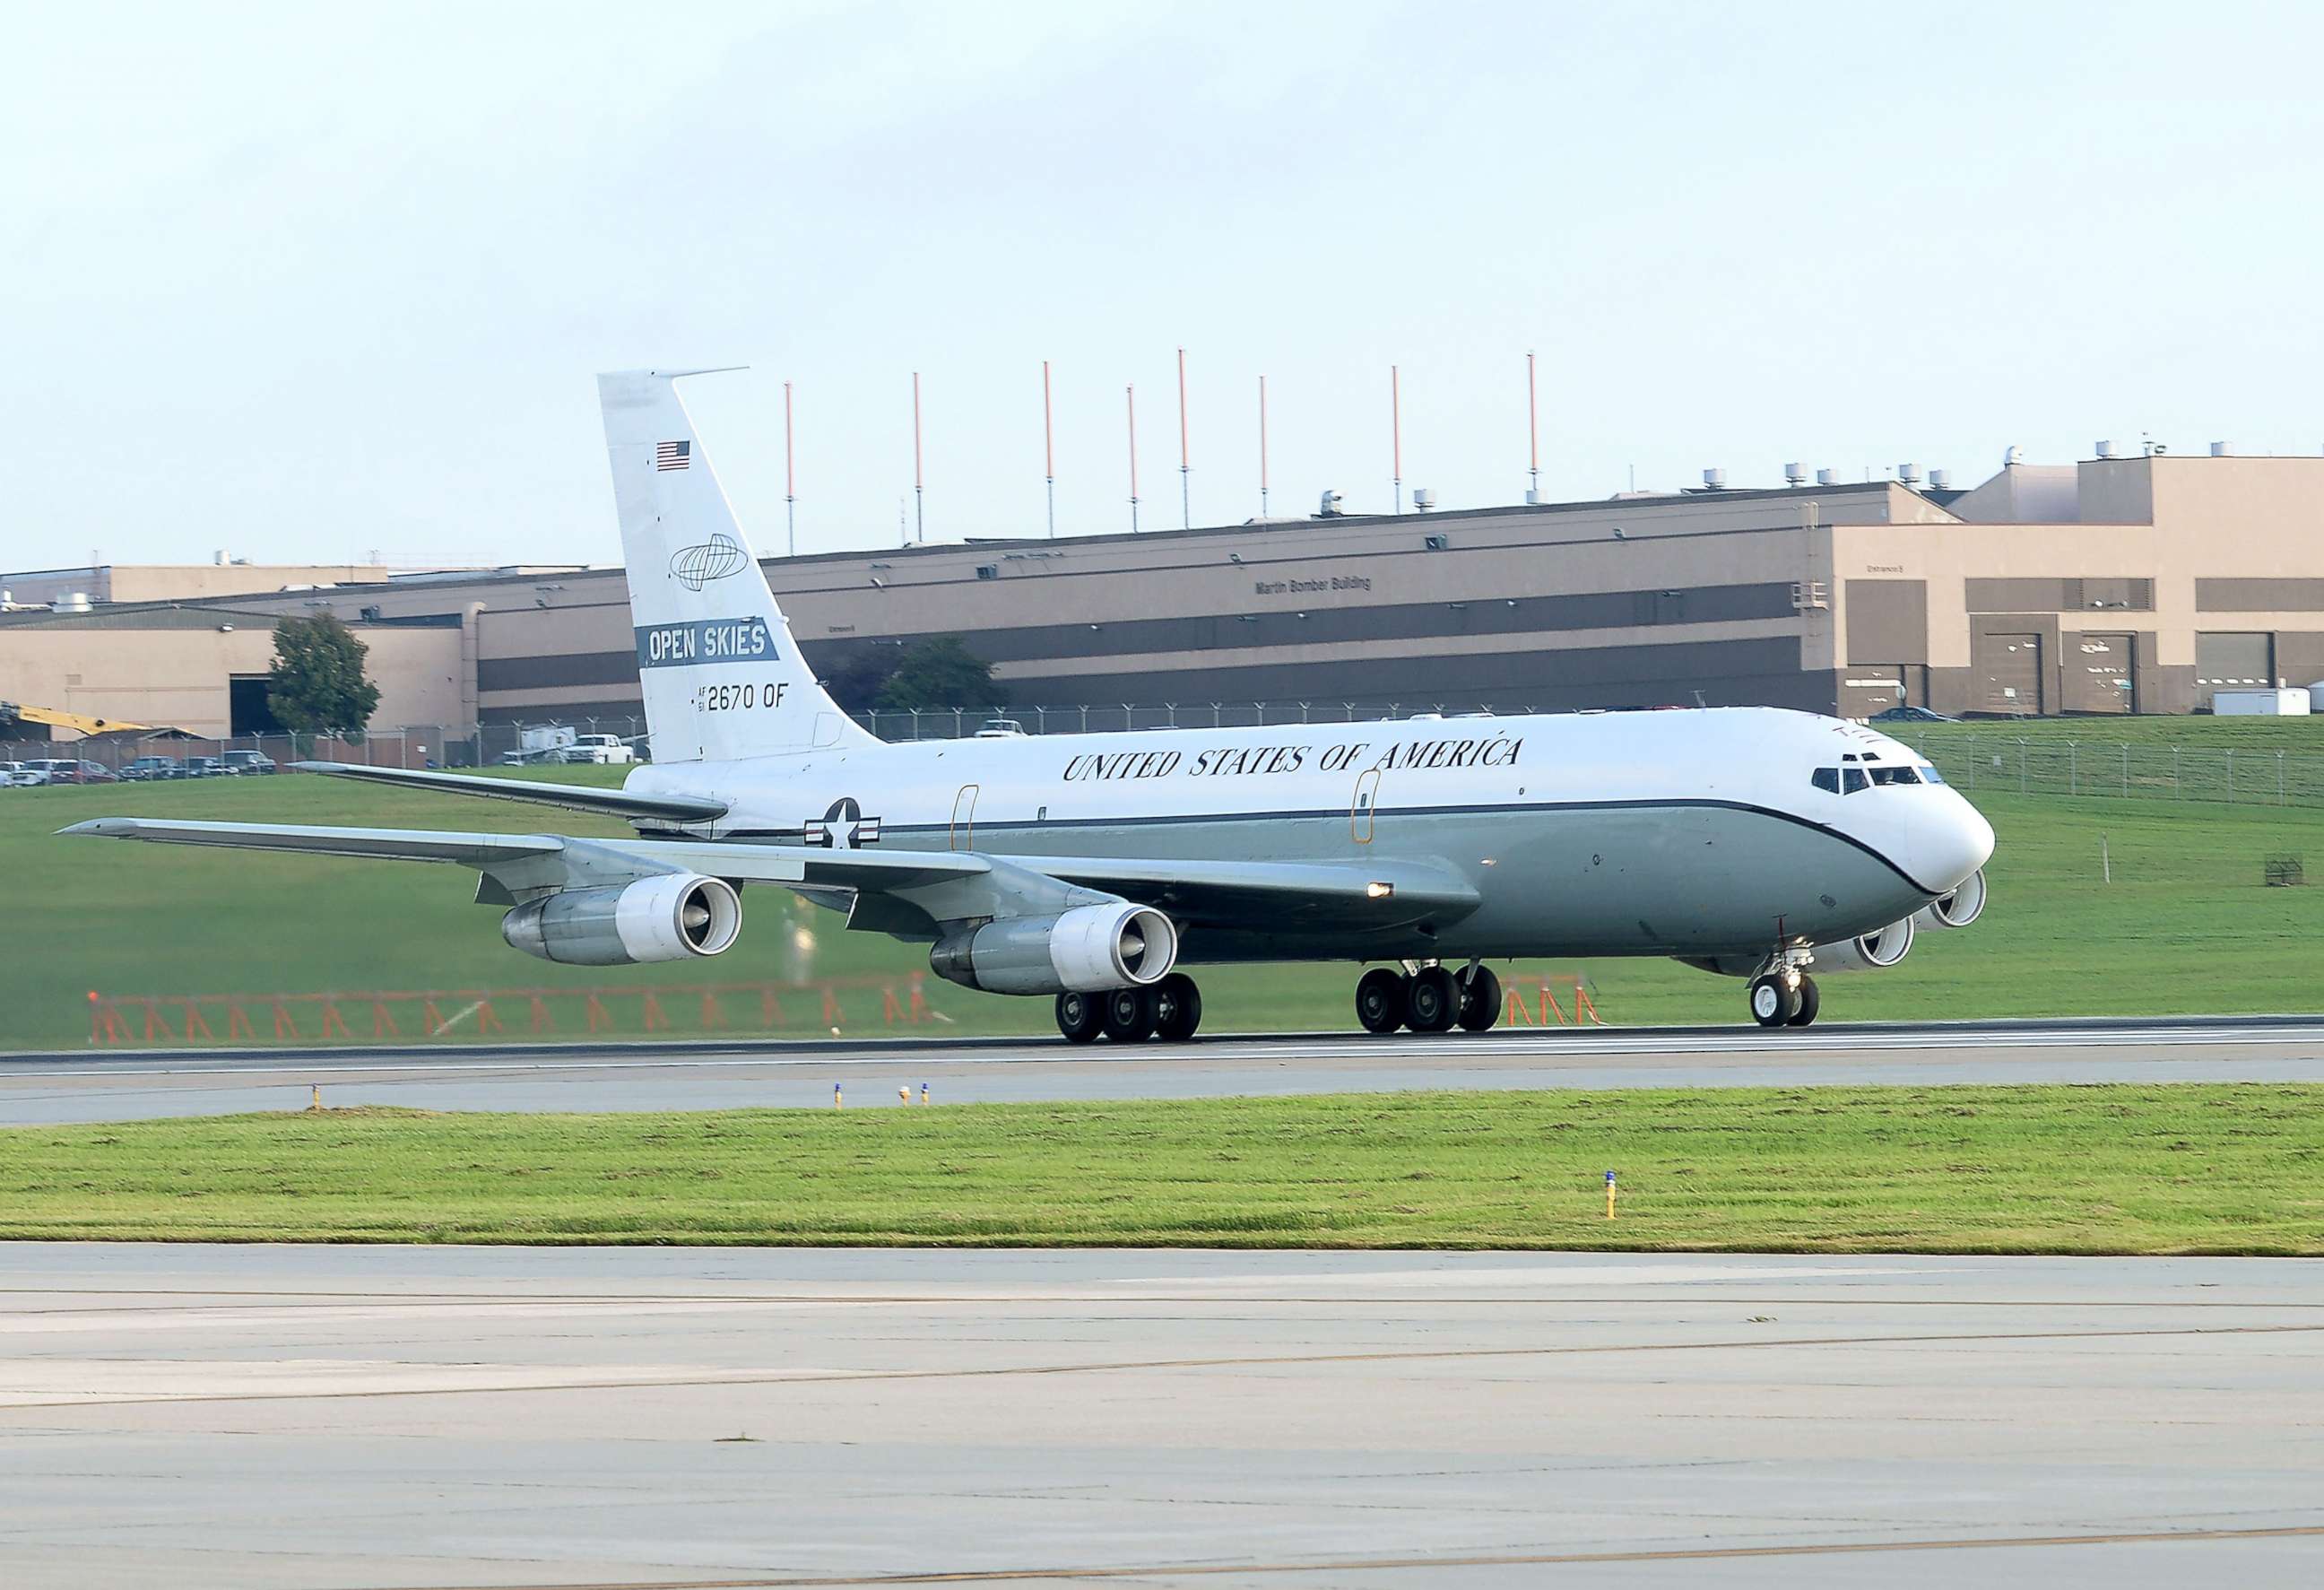 PHOTO: An OC-135 Open Skies aircraft takes off Sept. 14, 2018, from the flight line at Offutt Air Force Base, Nebraska